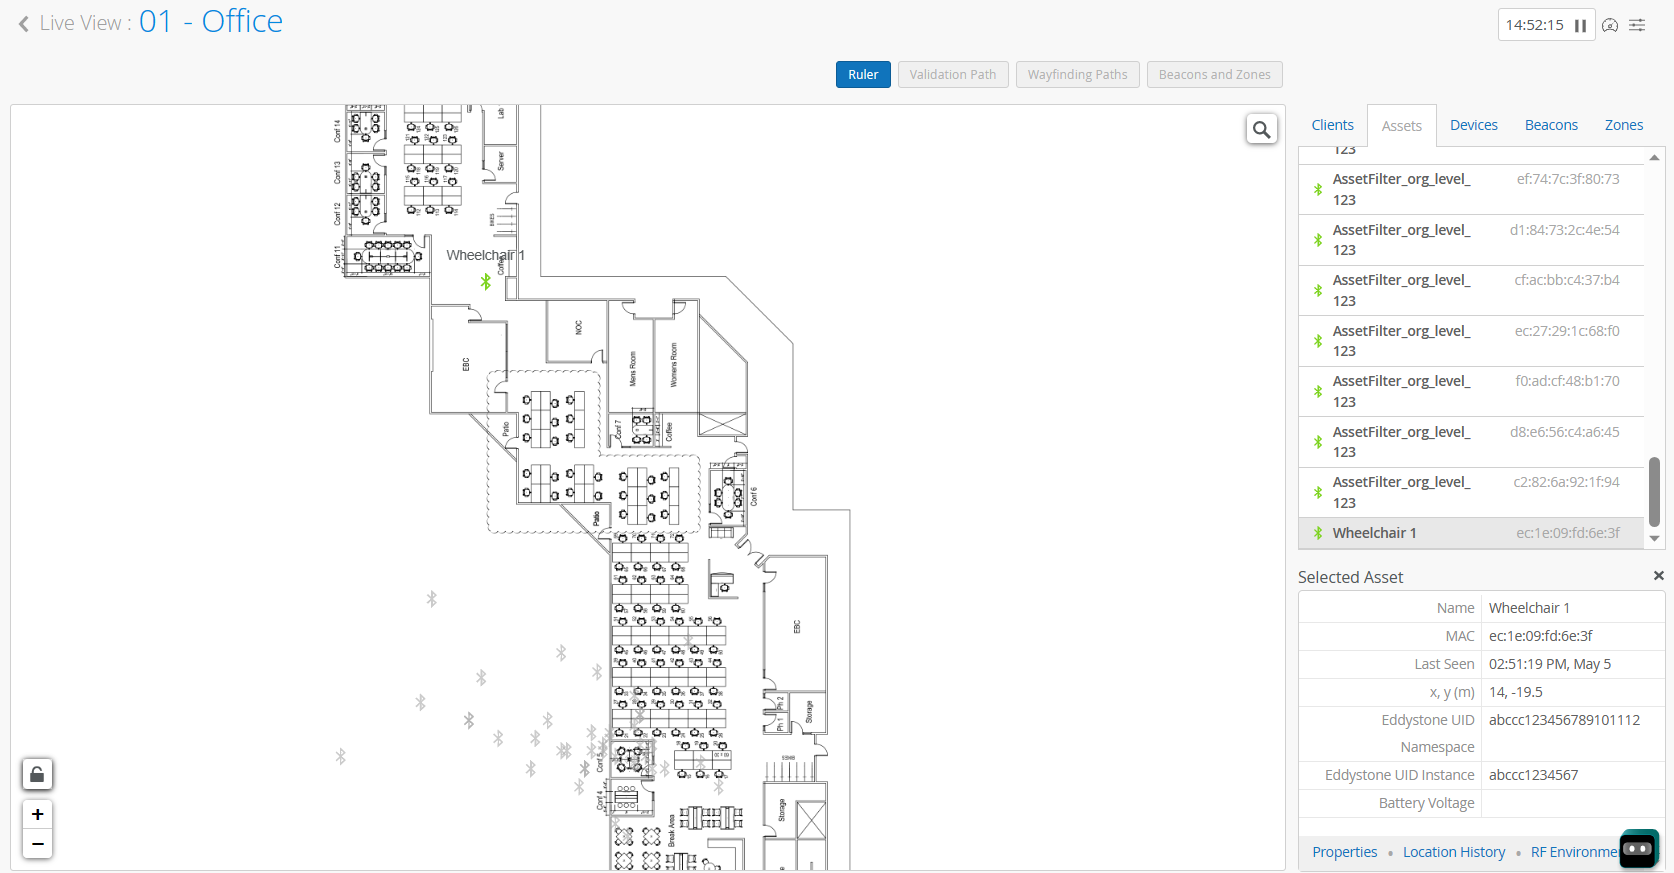 Live View page showing the floorplan and an icon labeled Wheelchair